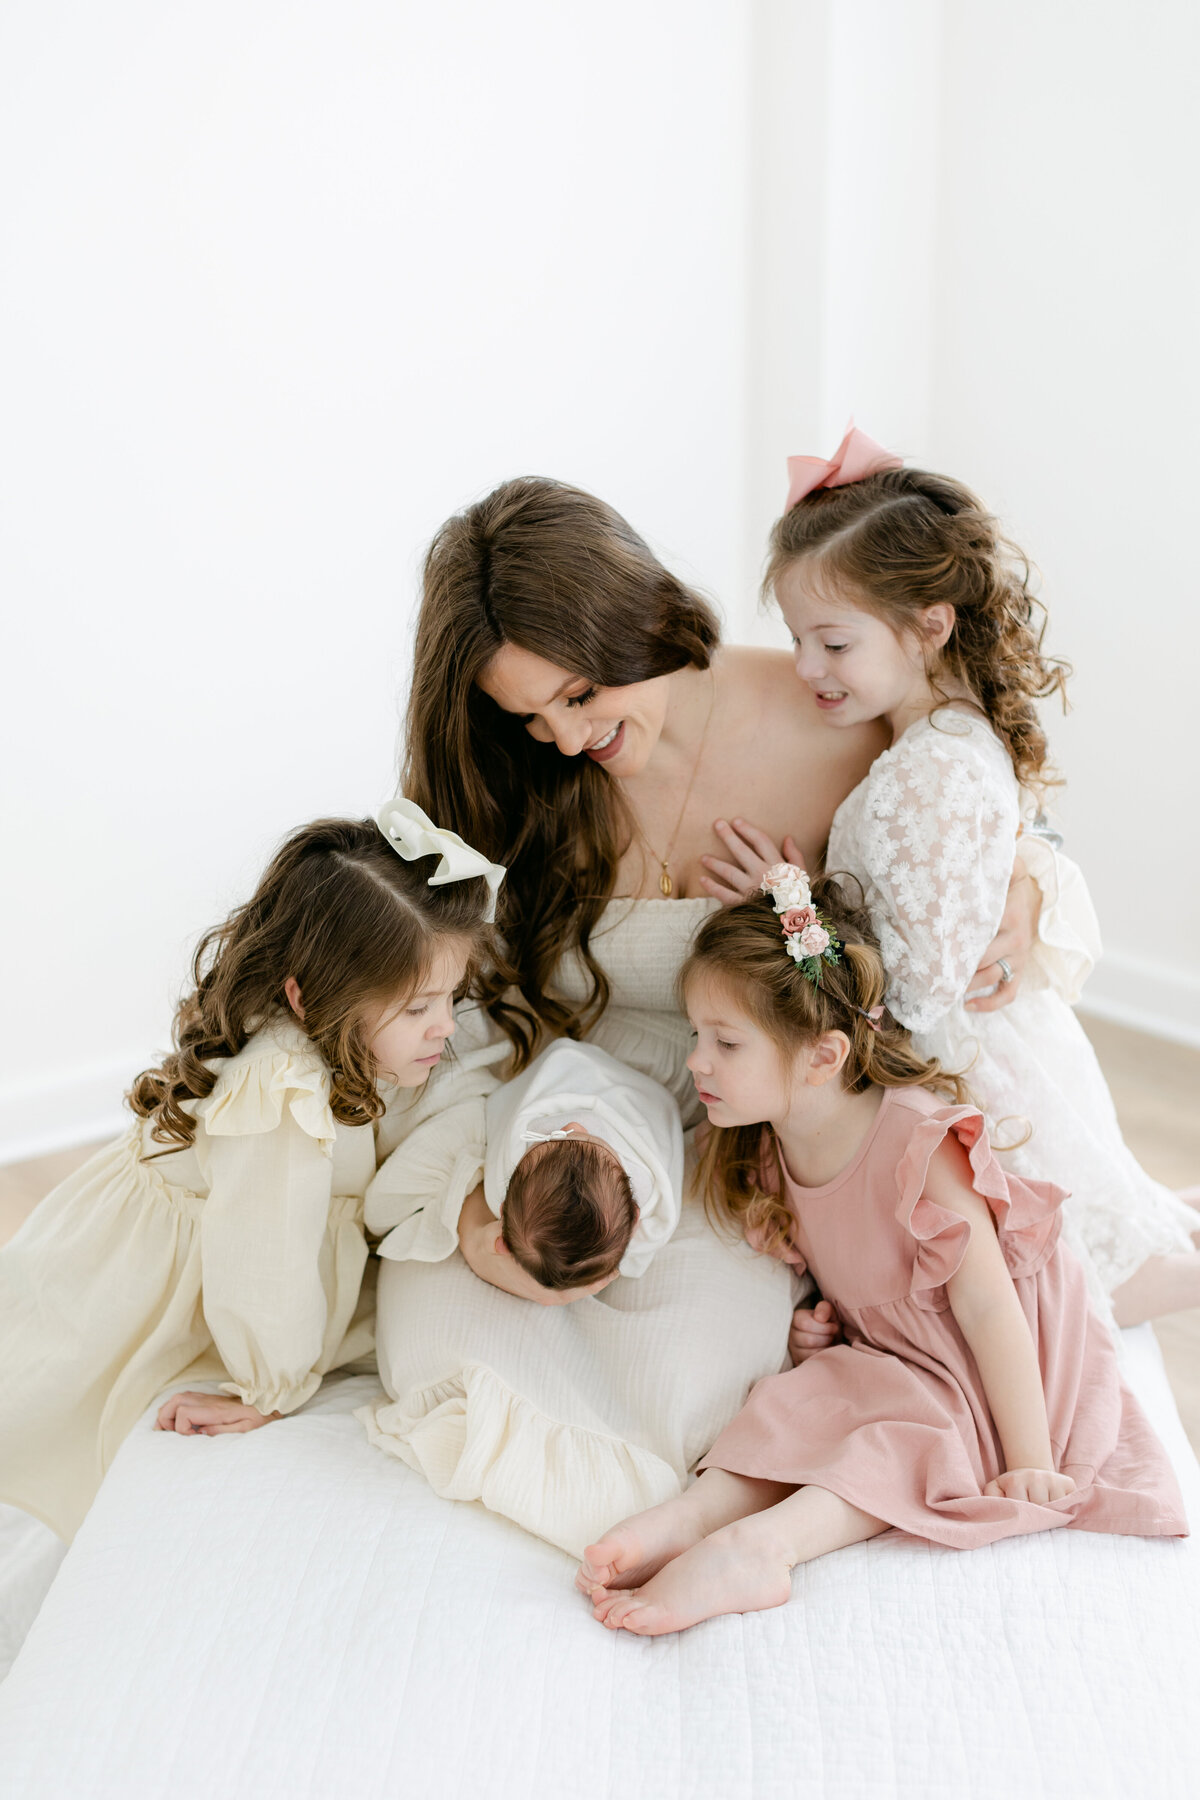 mom wearing a beautiful cream colored dress surrounded by her 3 toddler daughters on a white bed as she holds her newborn baby girl during her newborn session captured by Philadelphia Newborn Photographer Tara Federico